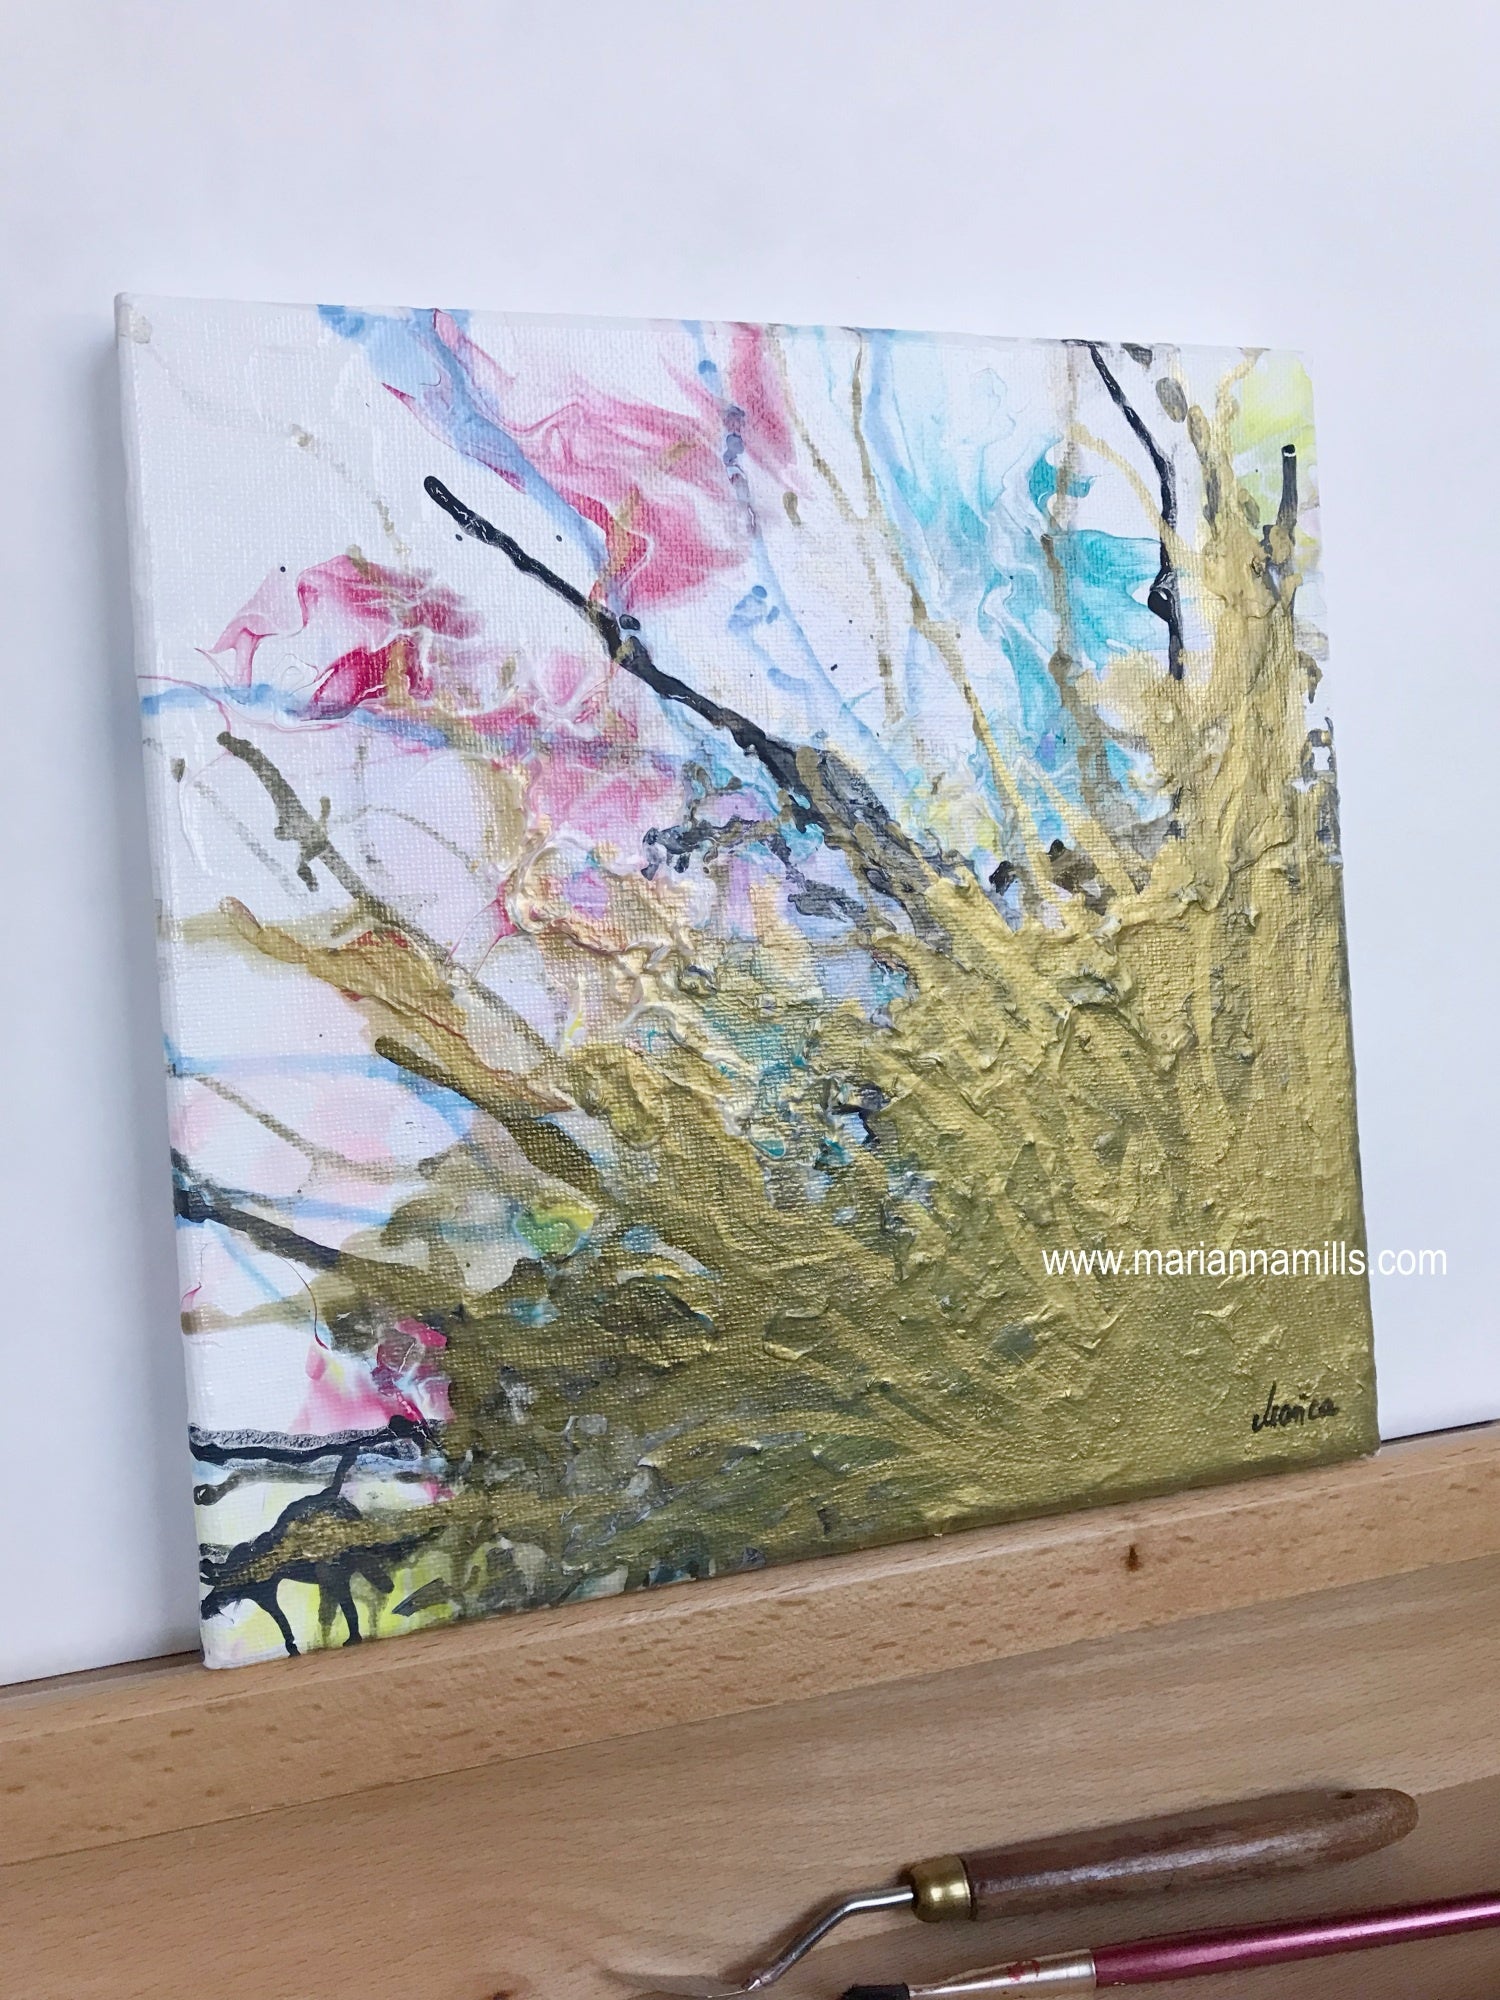 Outburst - 8x8 inches original mixed media fluid art, impasto painting by Marianna Mills . On easel